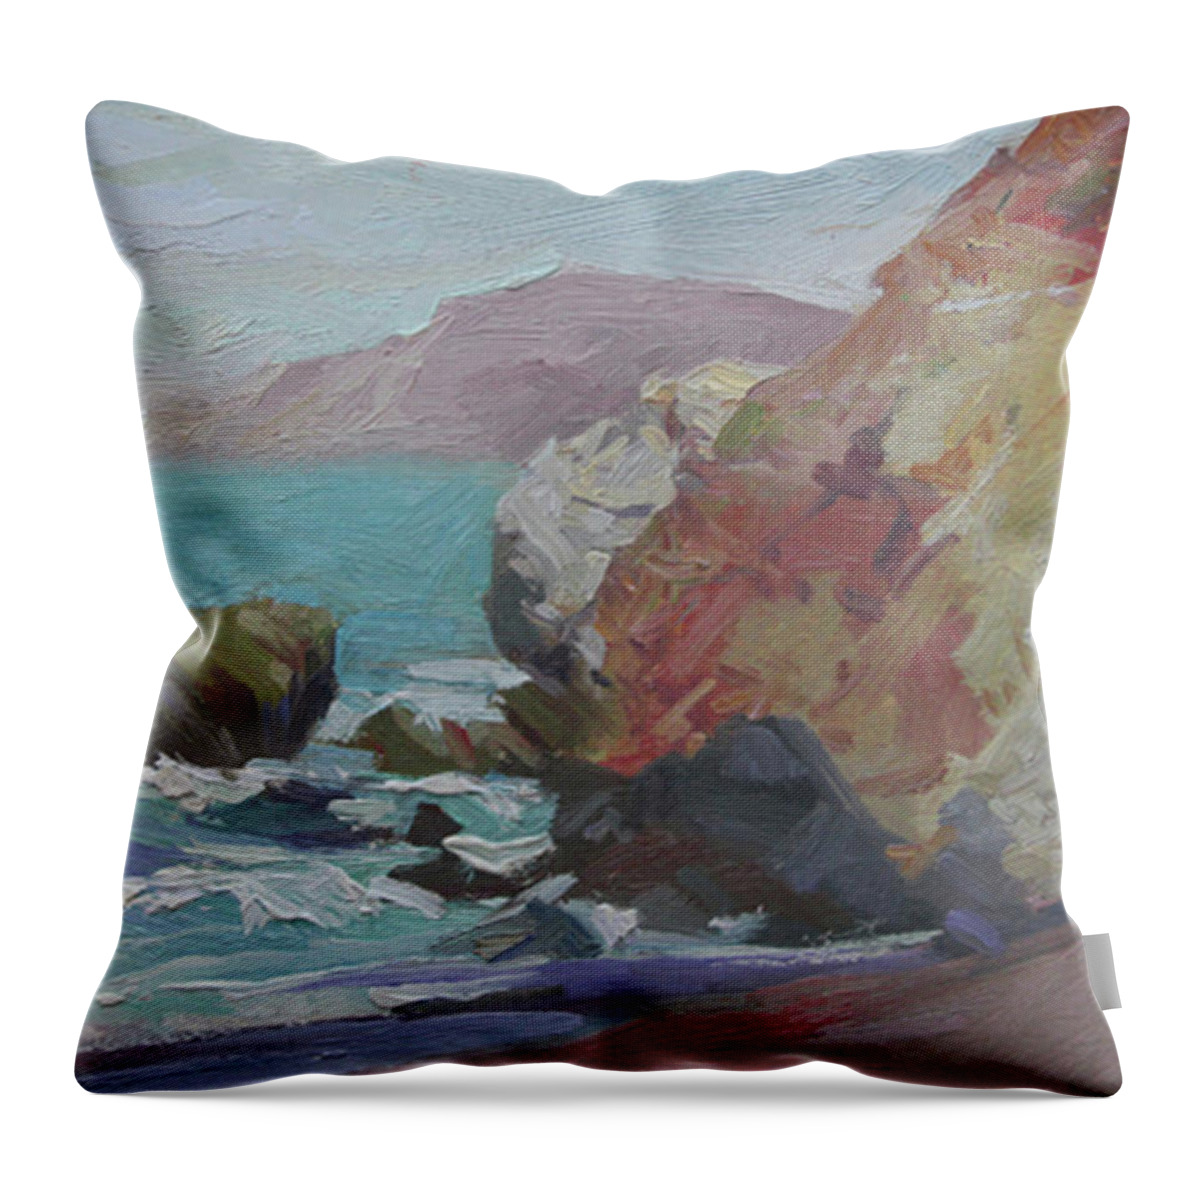 Catalina Island Plein Air Painting Throw Pillow featuring the painting Cottonwood Cove Catalina by Betty Jean Billups